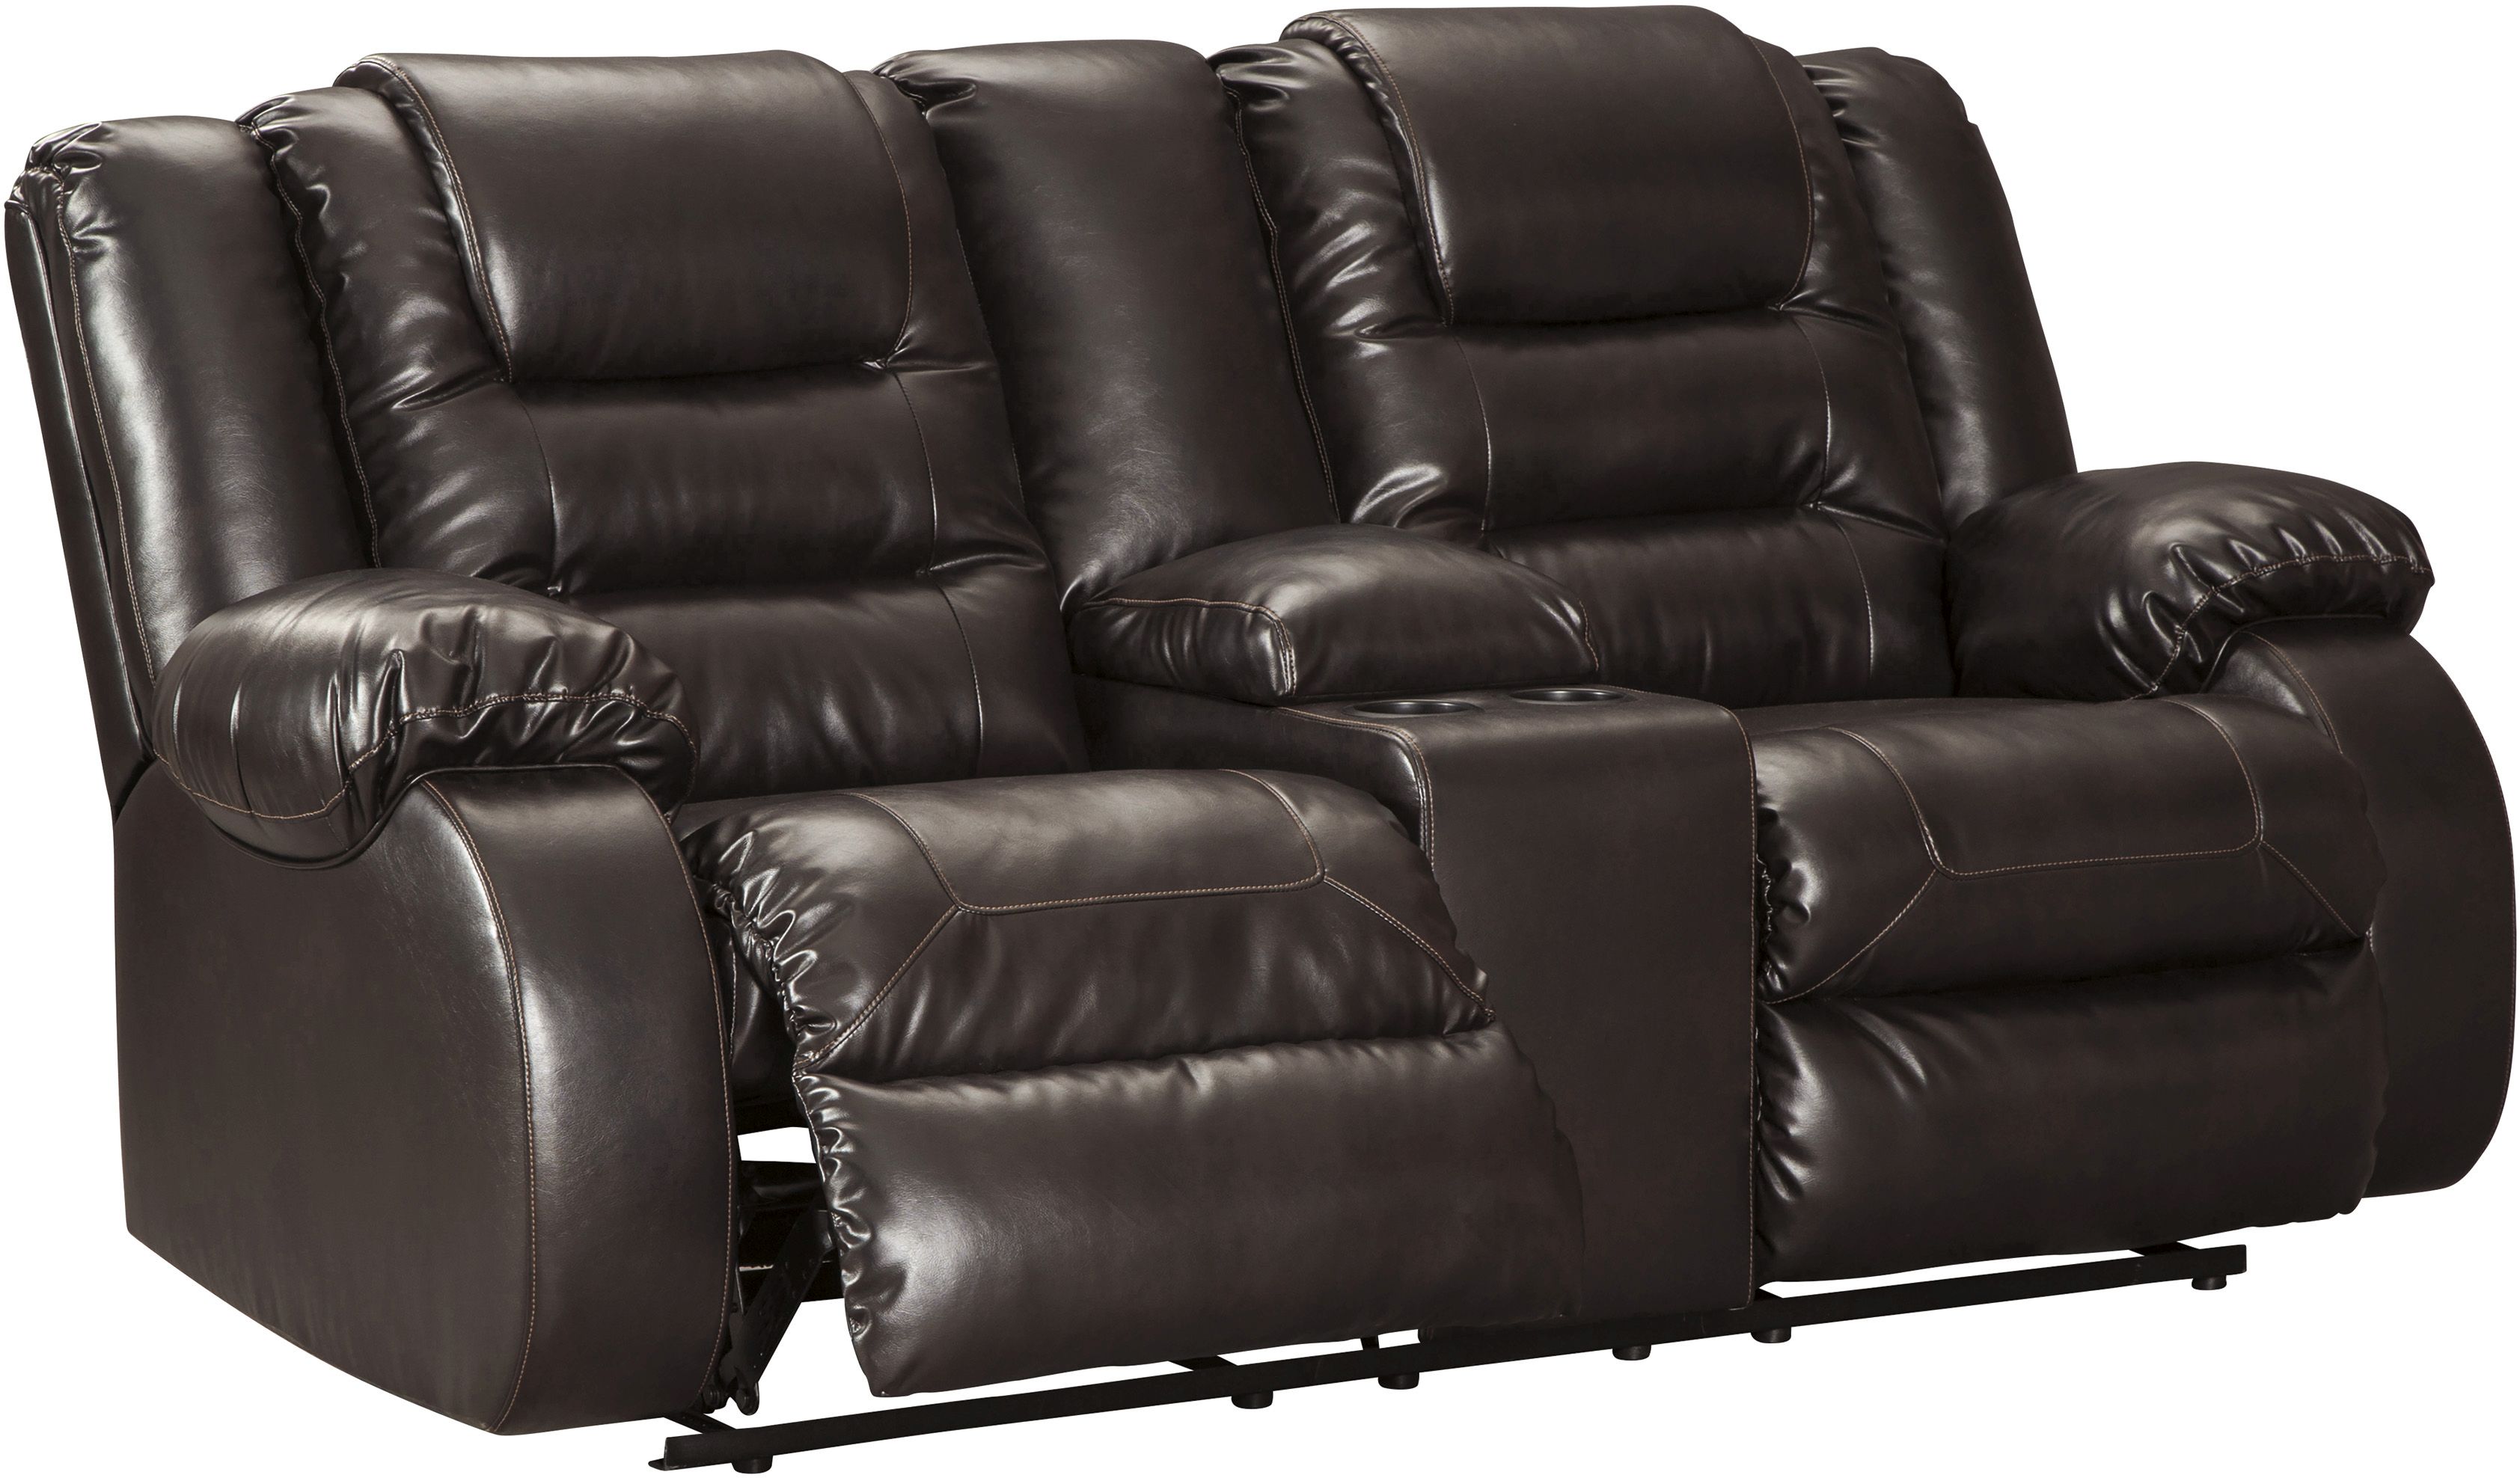 Signature Design by Ashley® Vacherie Chocolate Double Reclining Console Loveseat